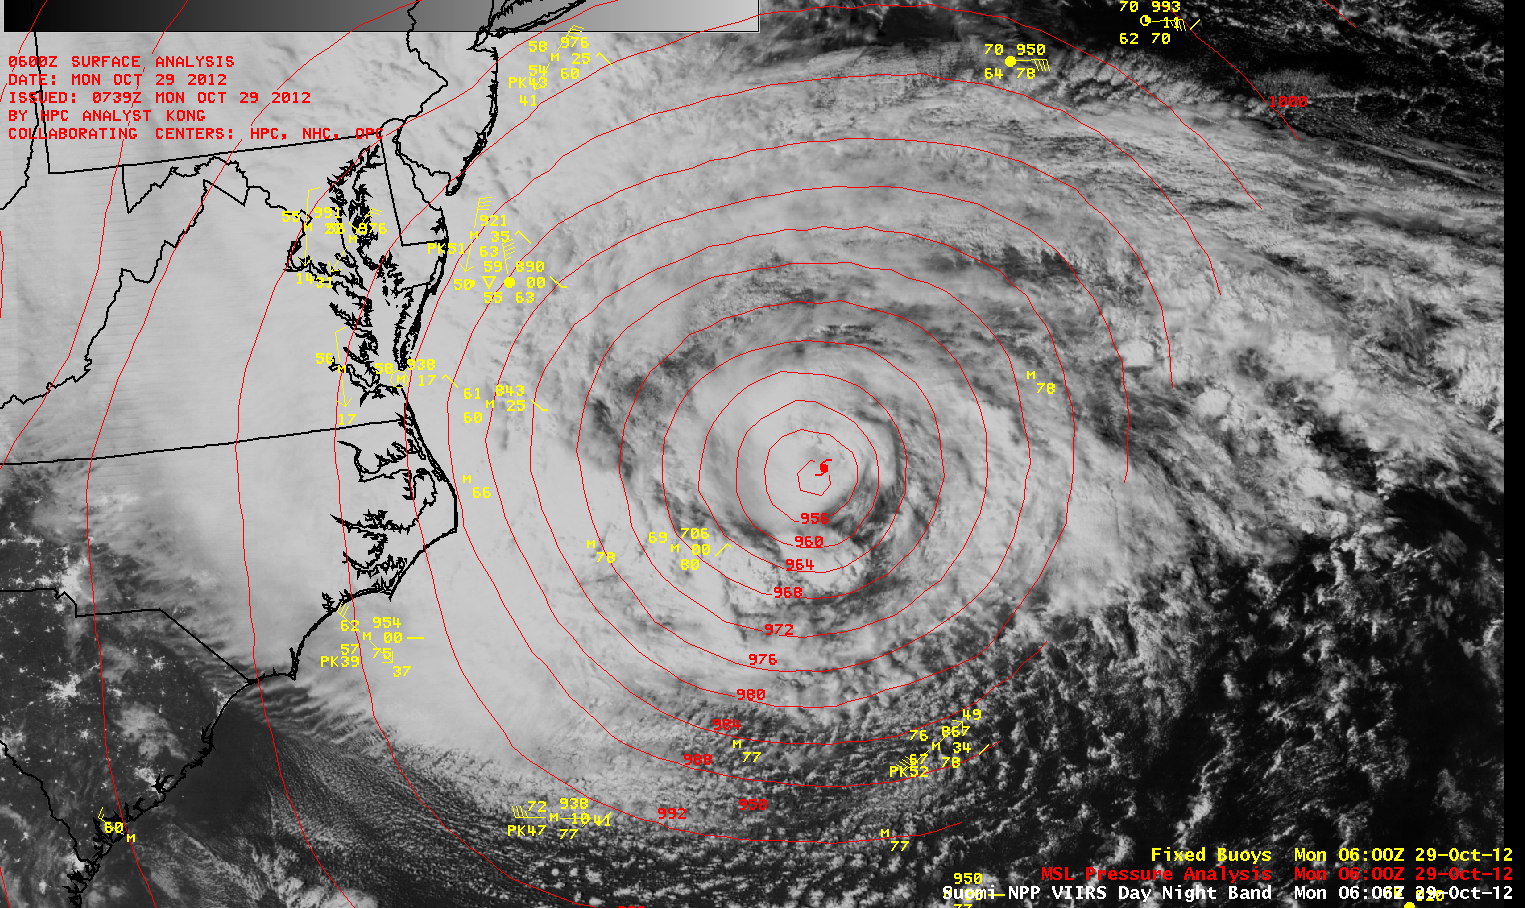 Suomi NPP Day/Night Band and 11.45 Âµm imagery of Hurricane Sandy